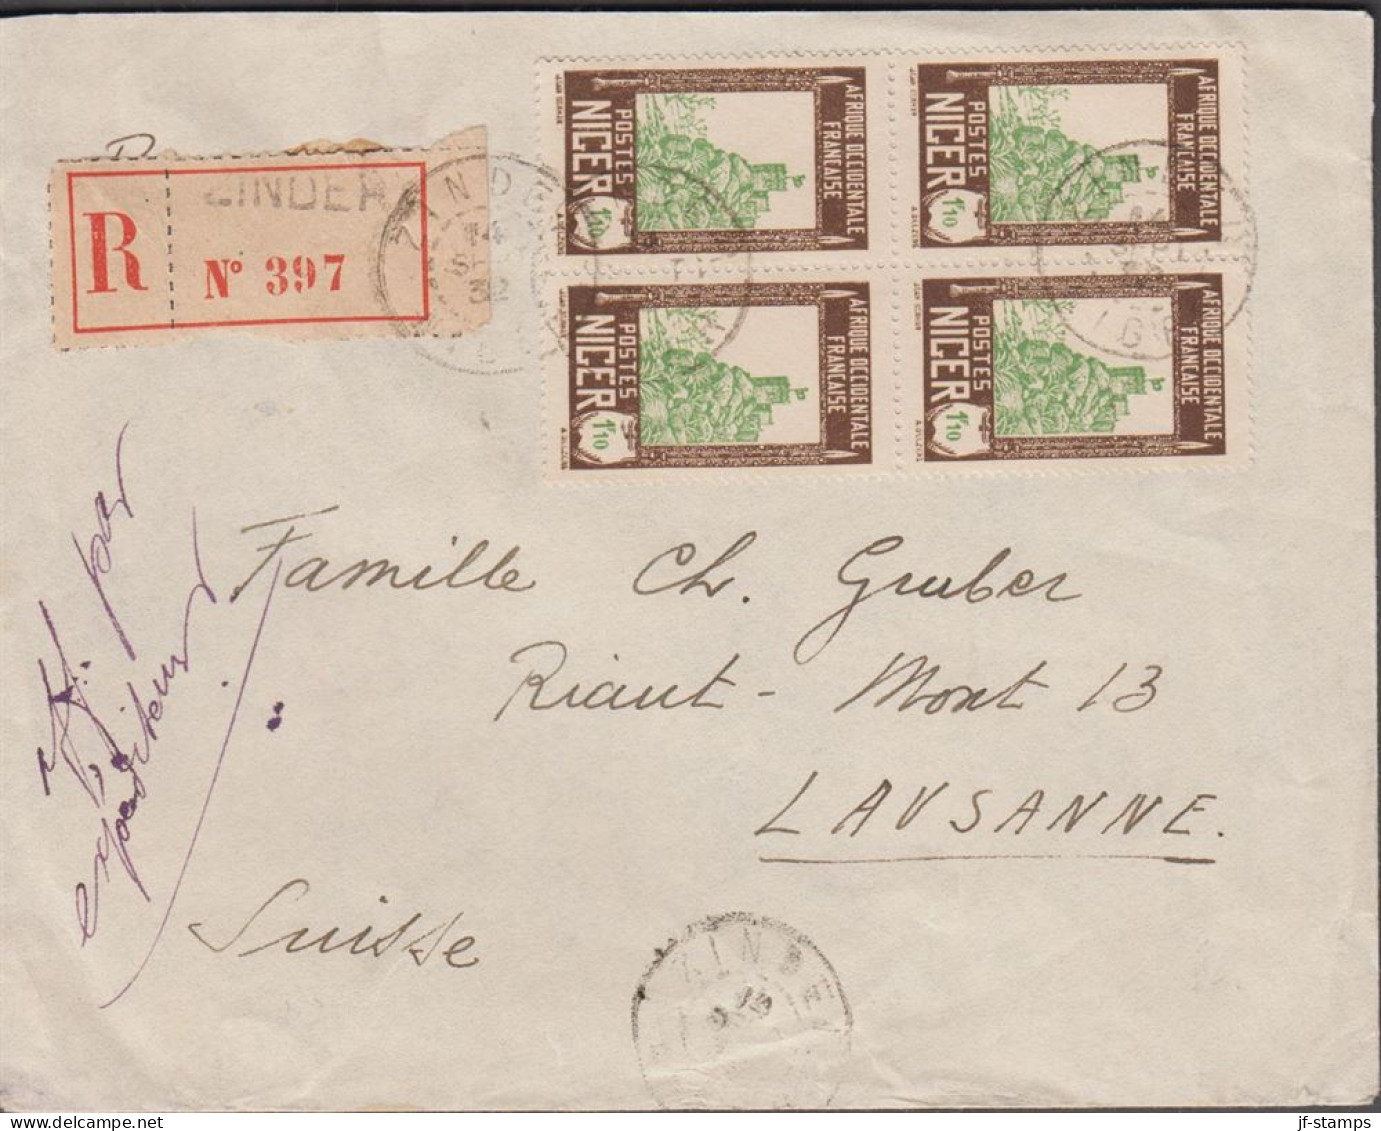 1932. NIGER. Fine Registered Cover To Lausanne, Suisse With 4block 1F10 Fort Zinder Cancelled ... (MICHEL 47) - JF545401 - Used Stamps